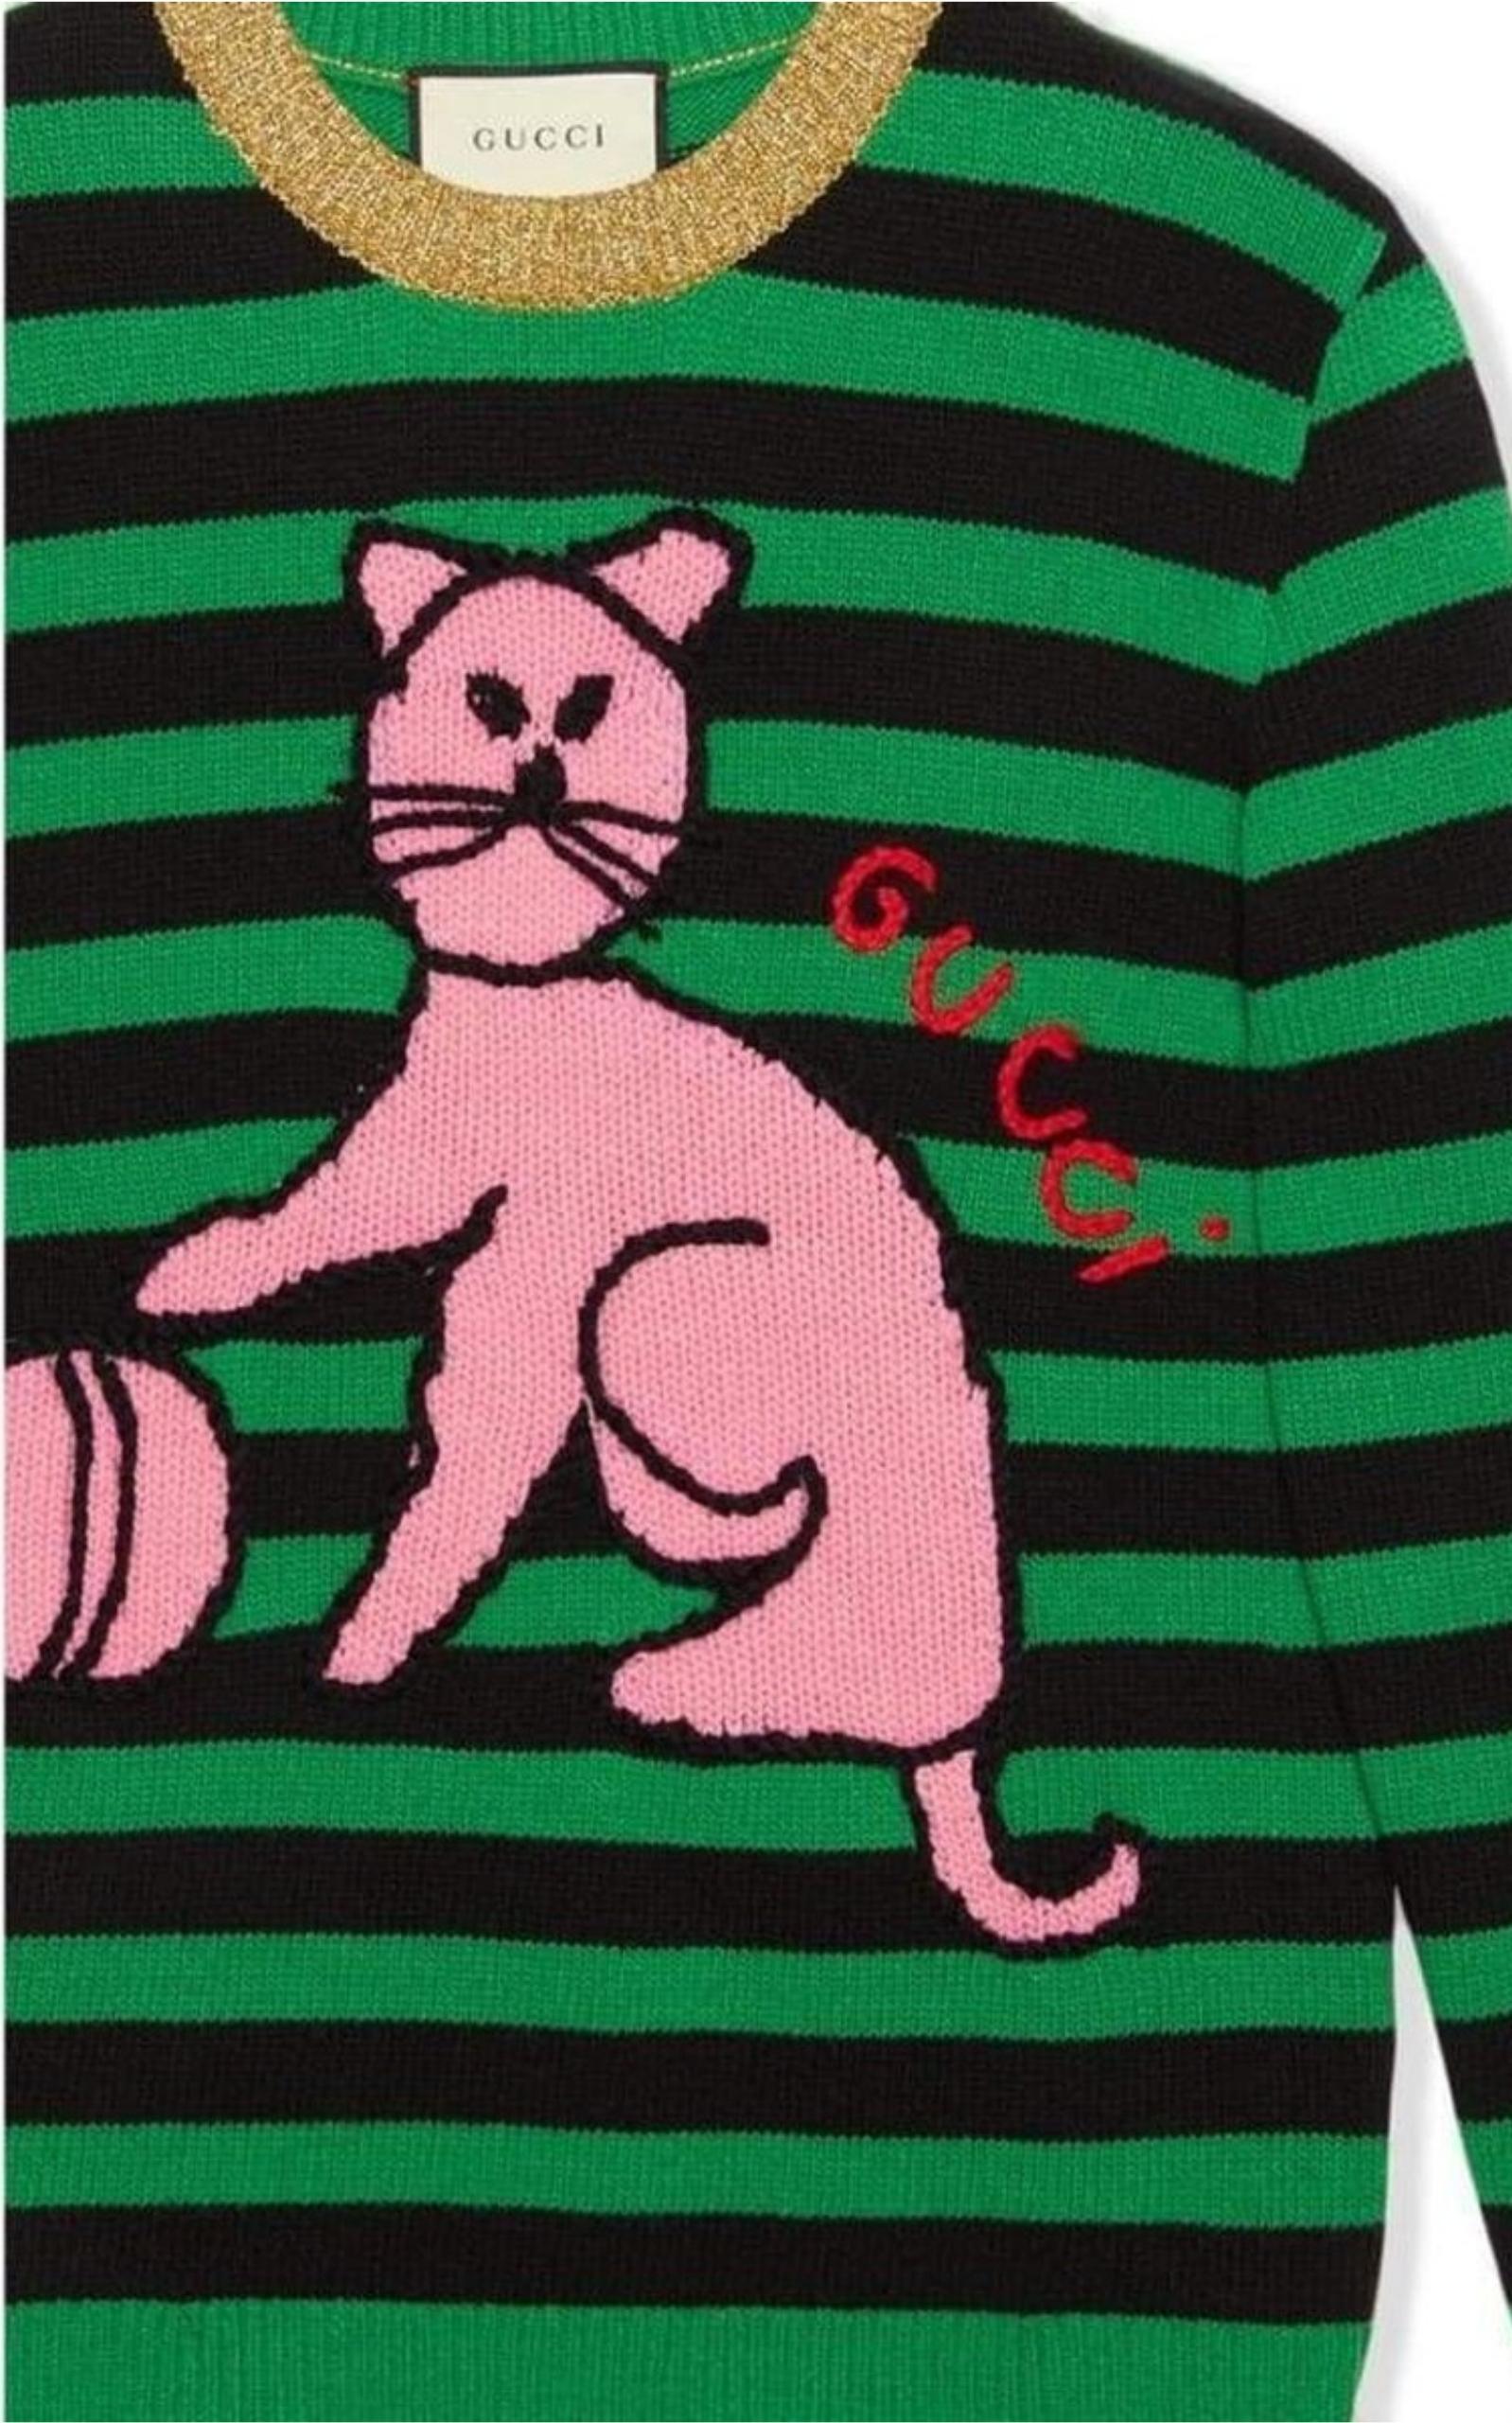  GucciSweater with Cat and Baseball - Runway Catalog